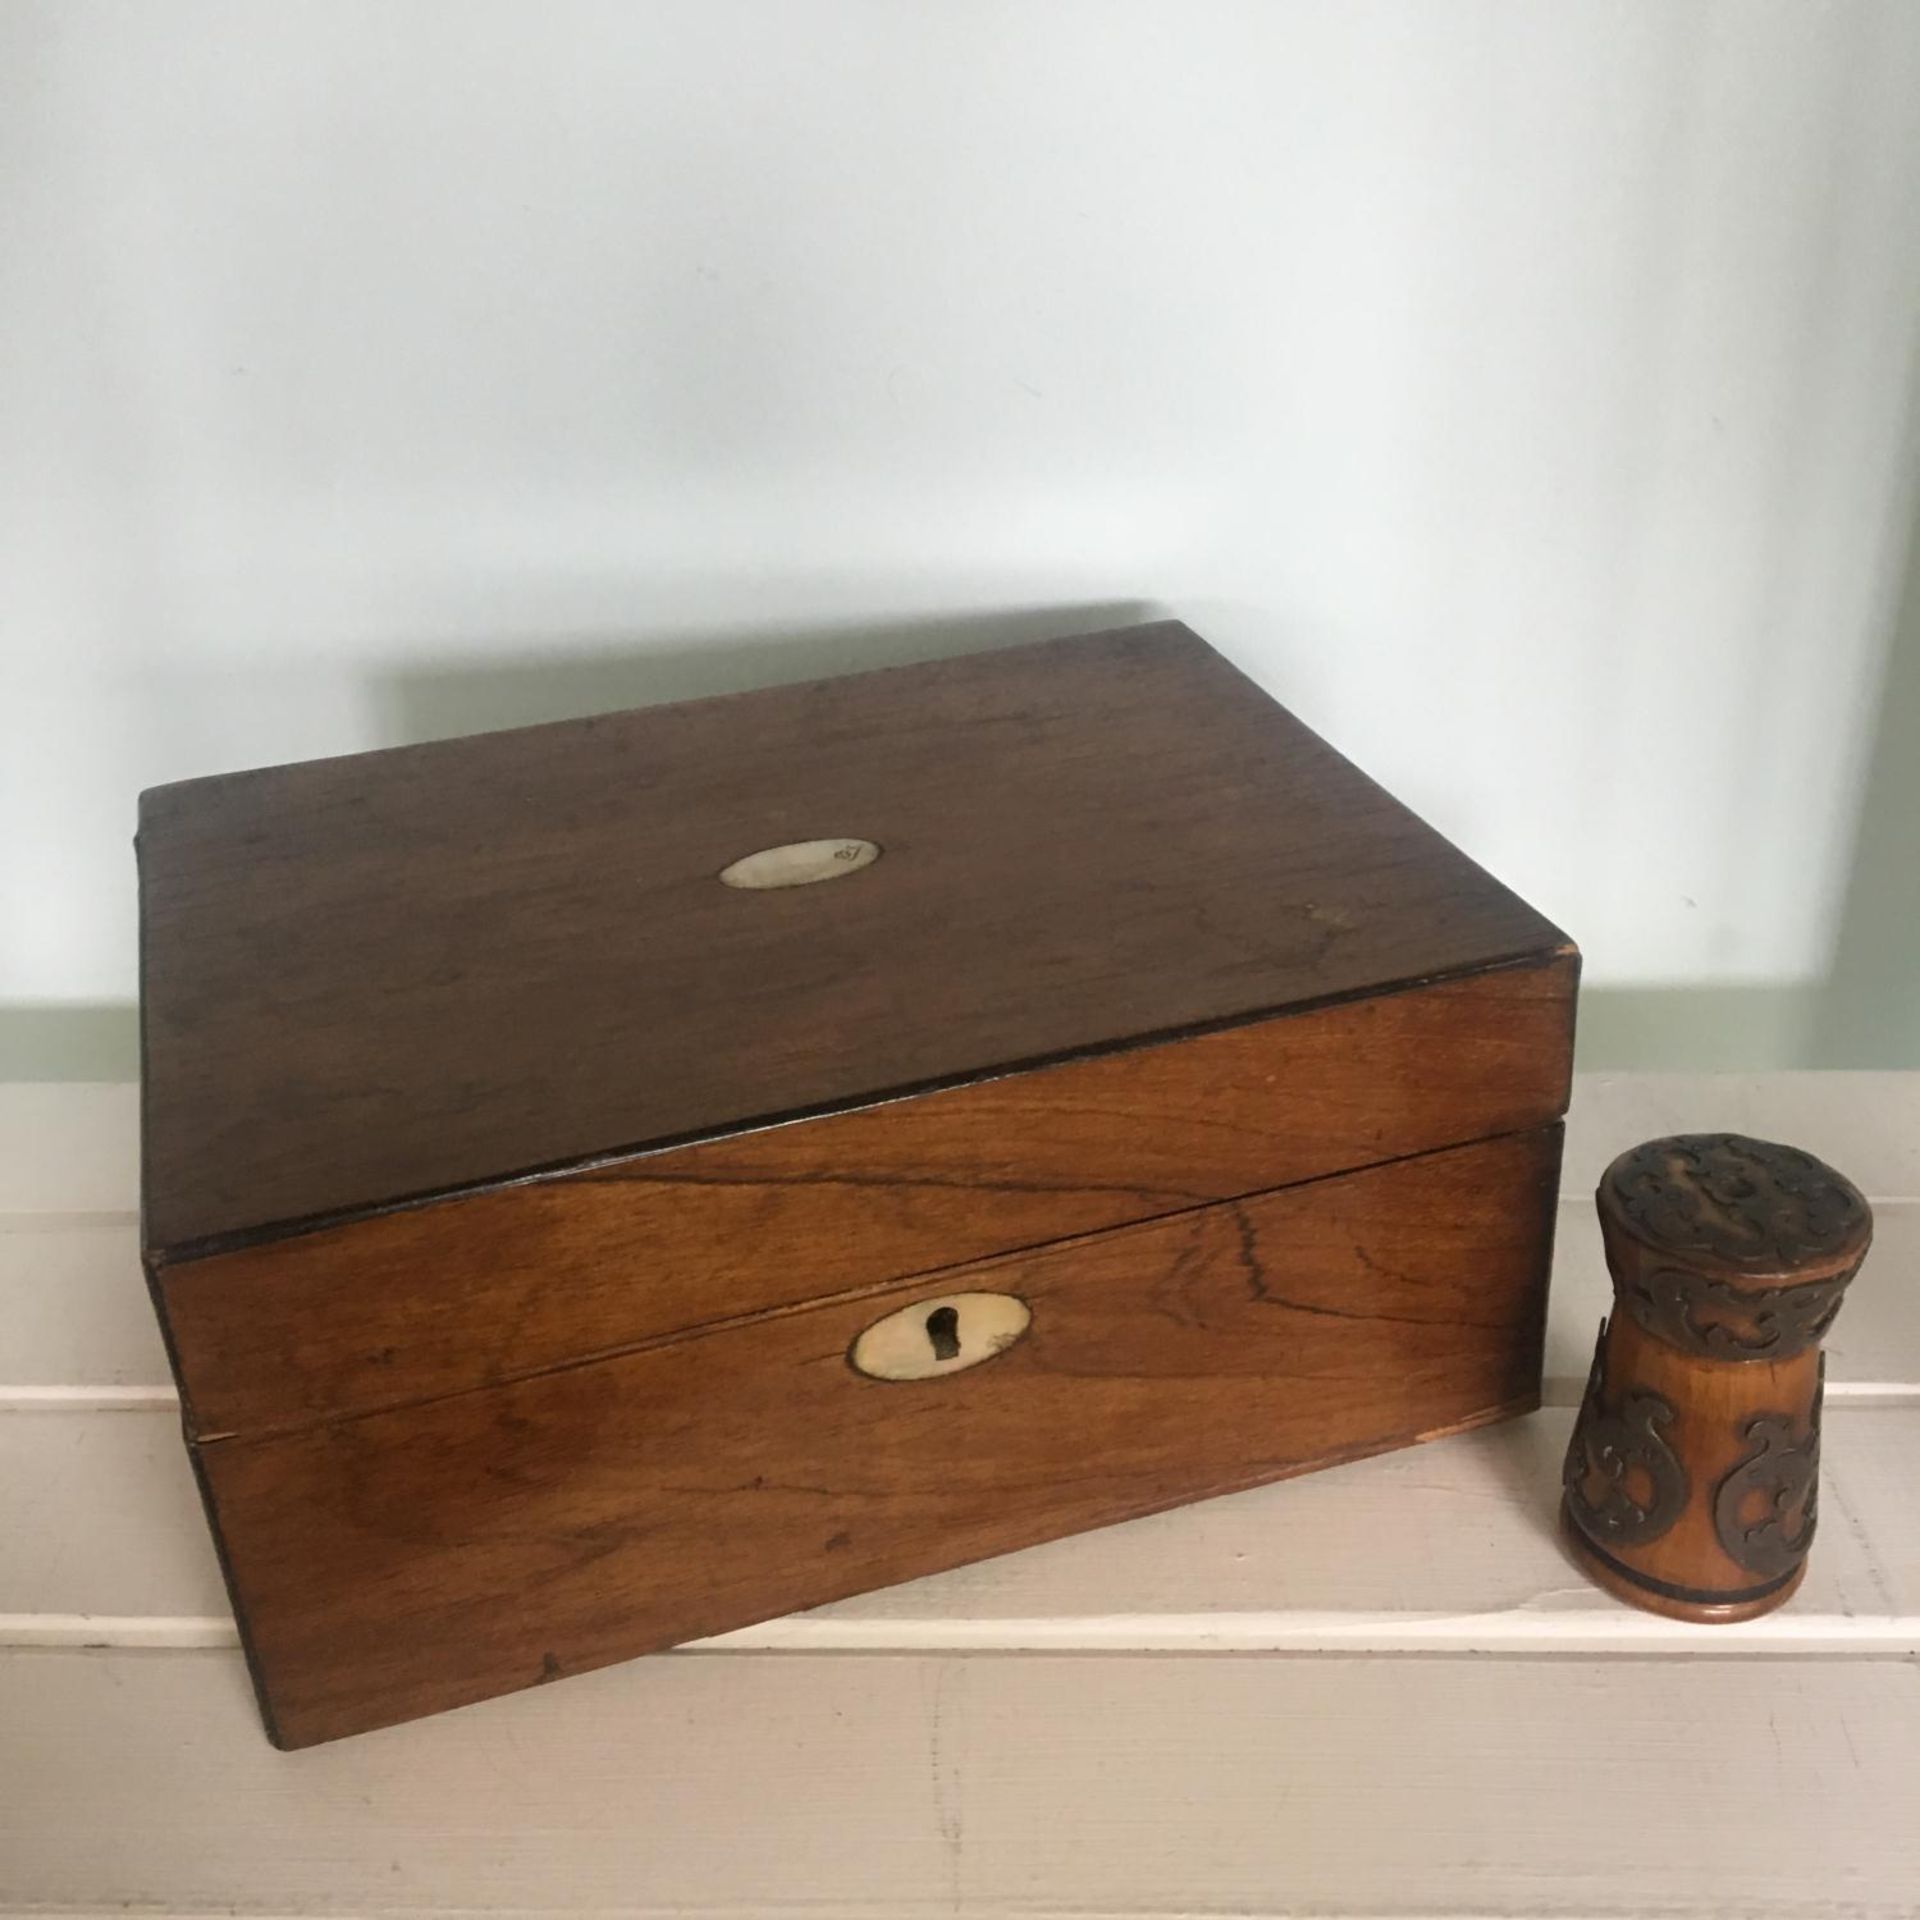 Victorian oak jewellery box with mother of pearl inlay (the hinges are in need of repair),